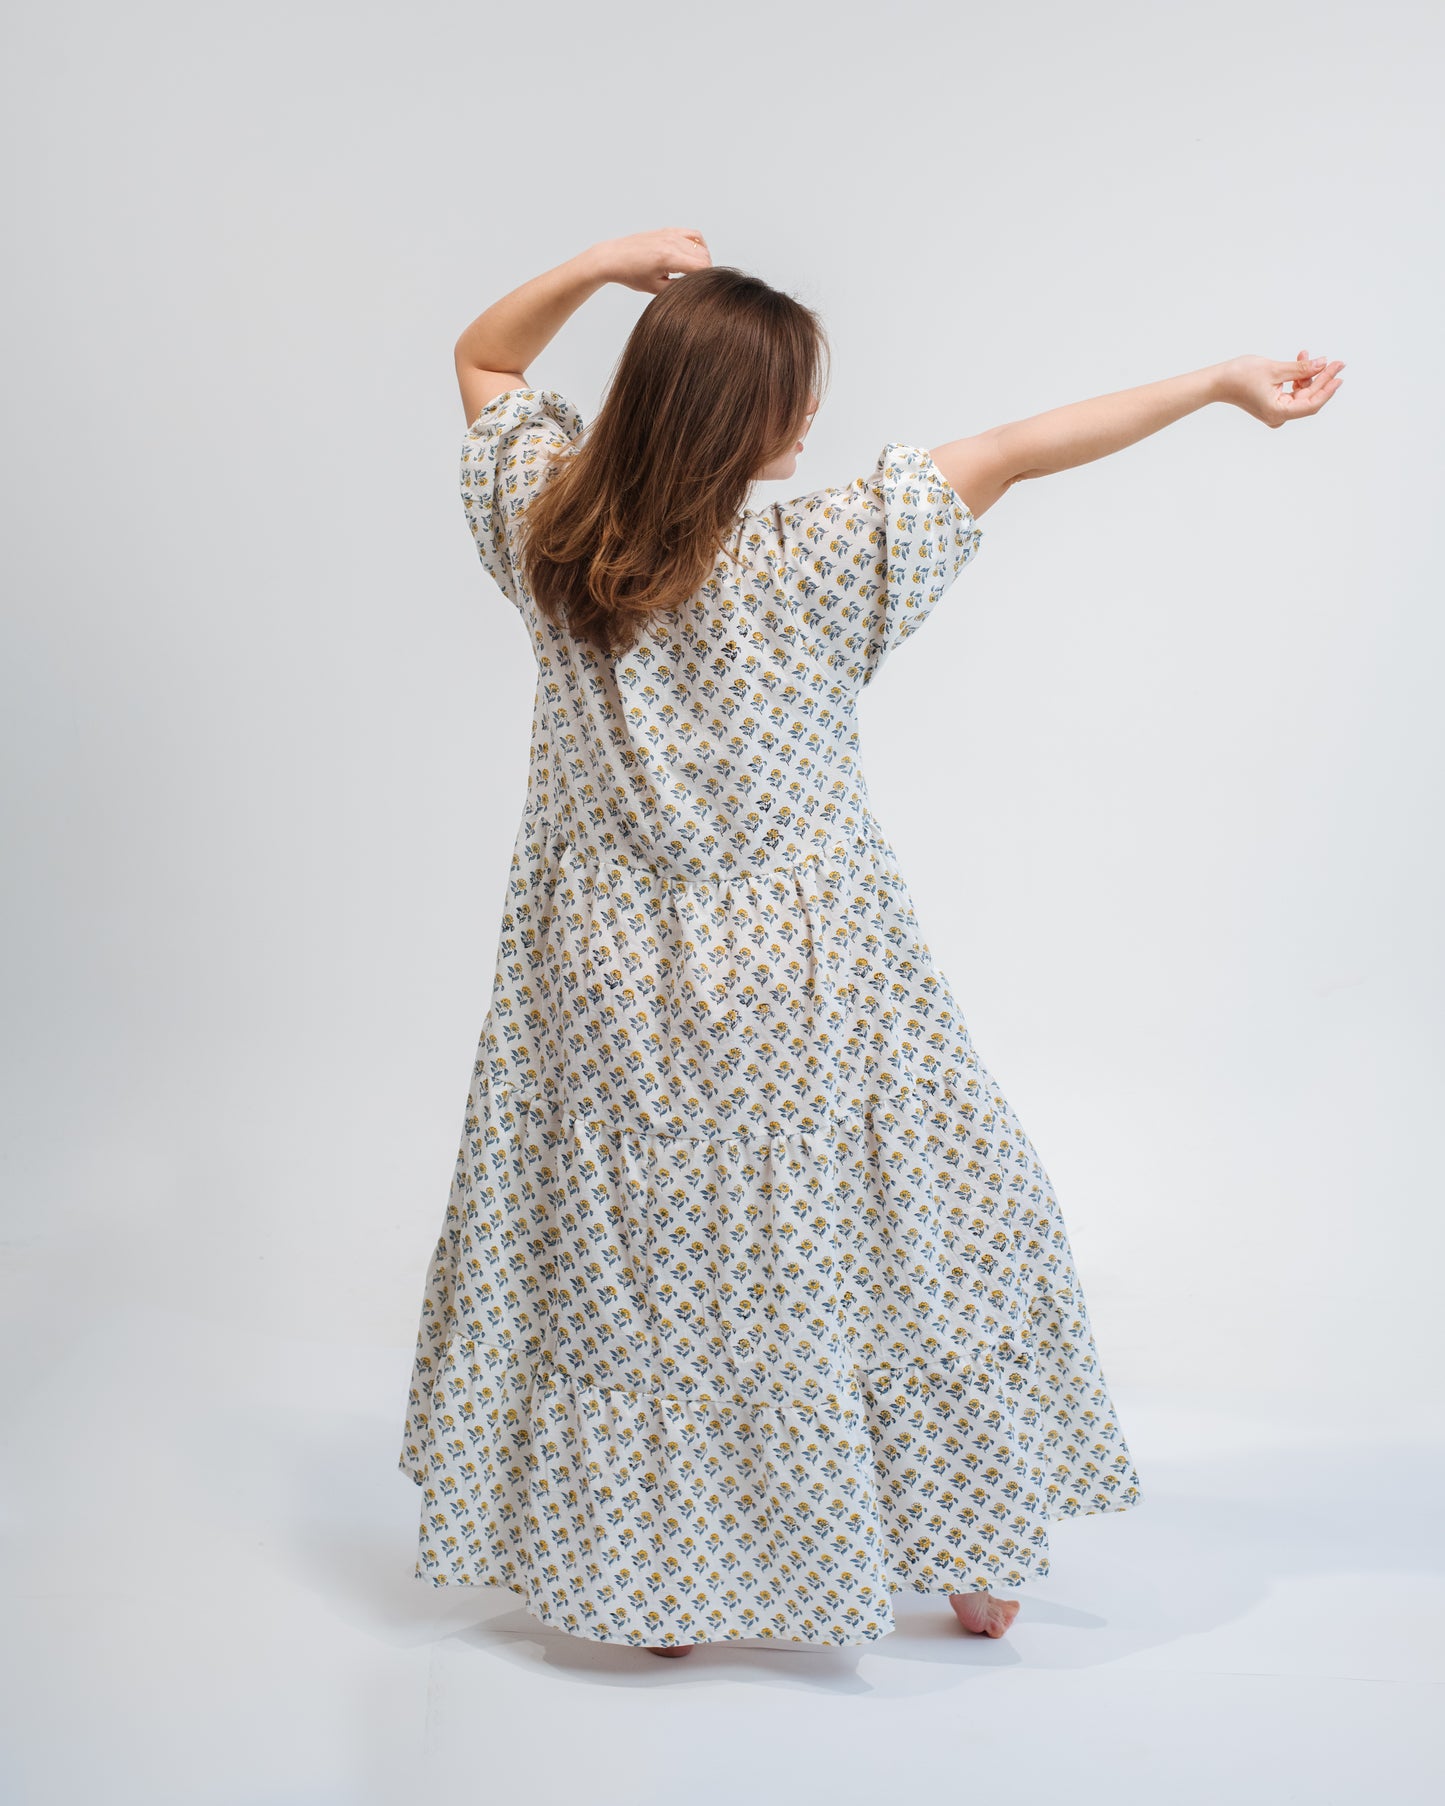 Isabel Dress in Buttercup ~ PRE ORDER